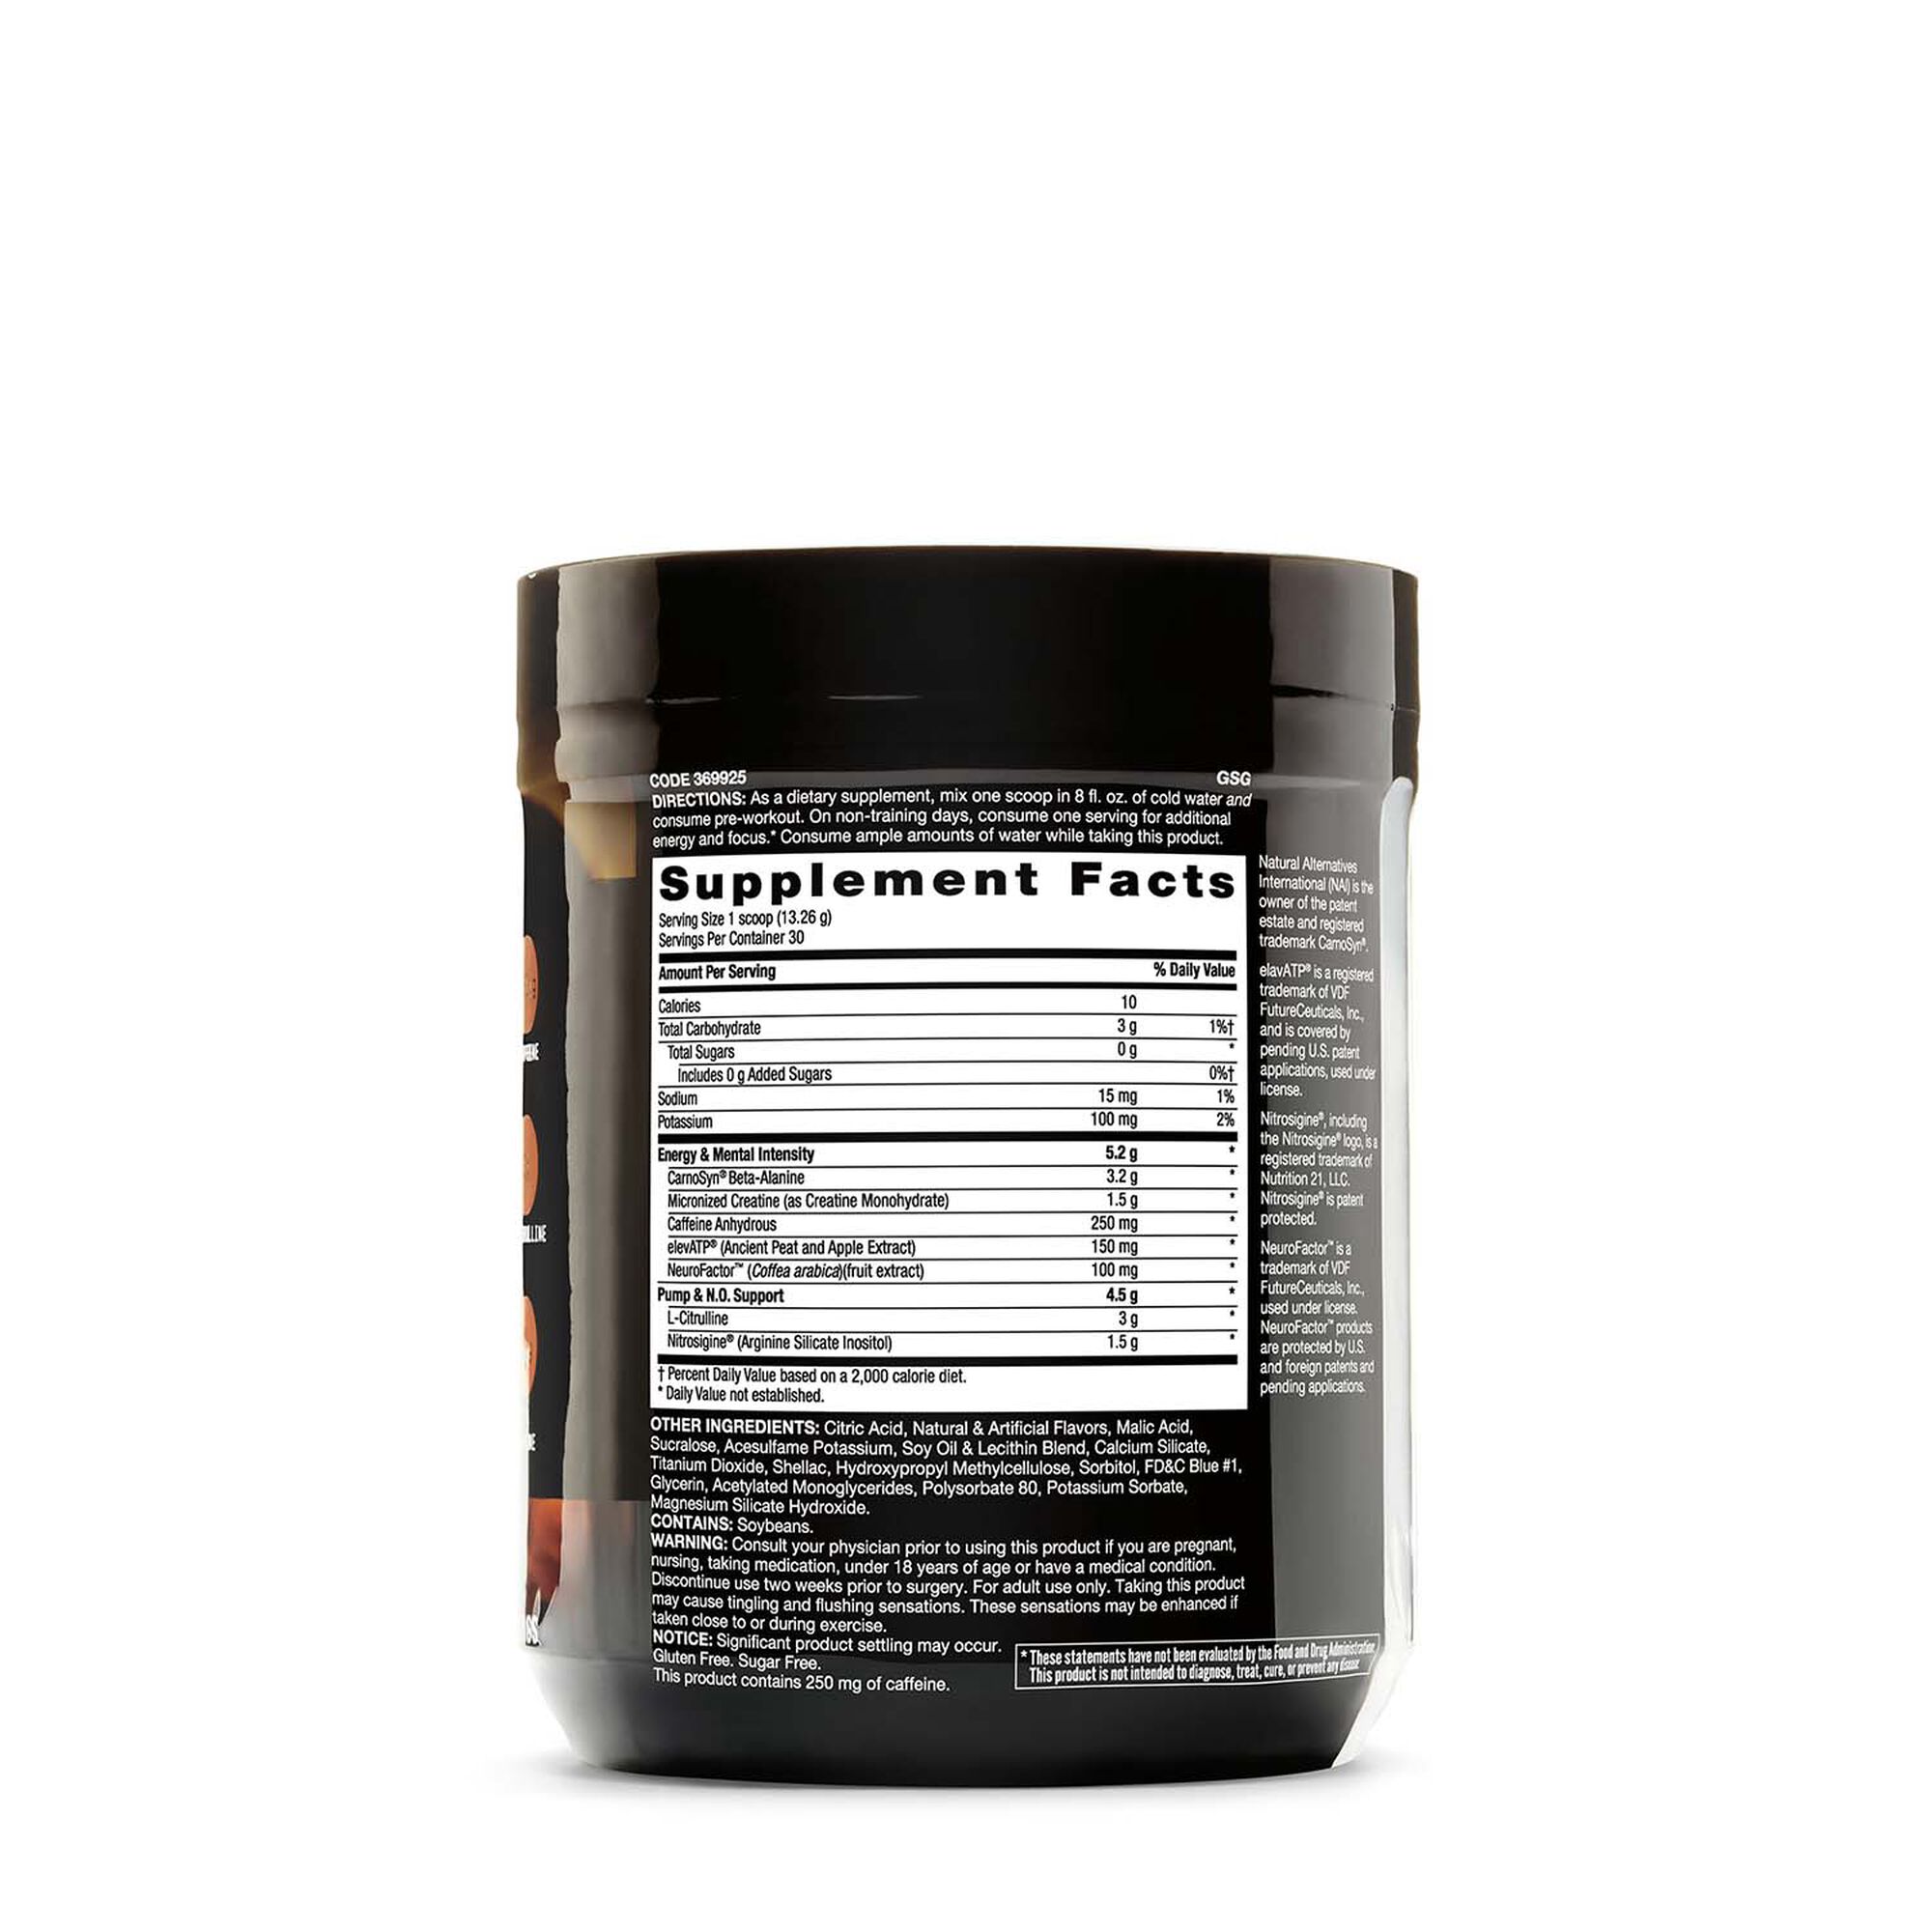  Lit Pre Workout Beyond Raw Review for Burn Fat fast